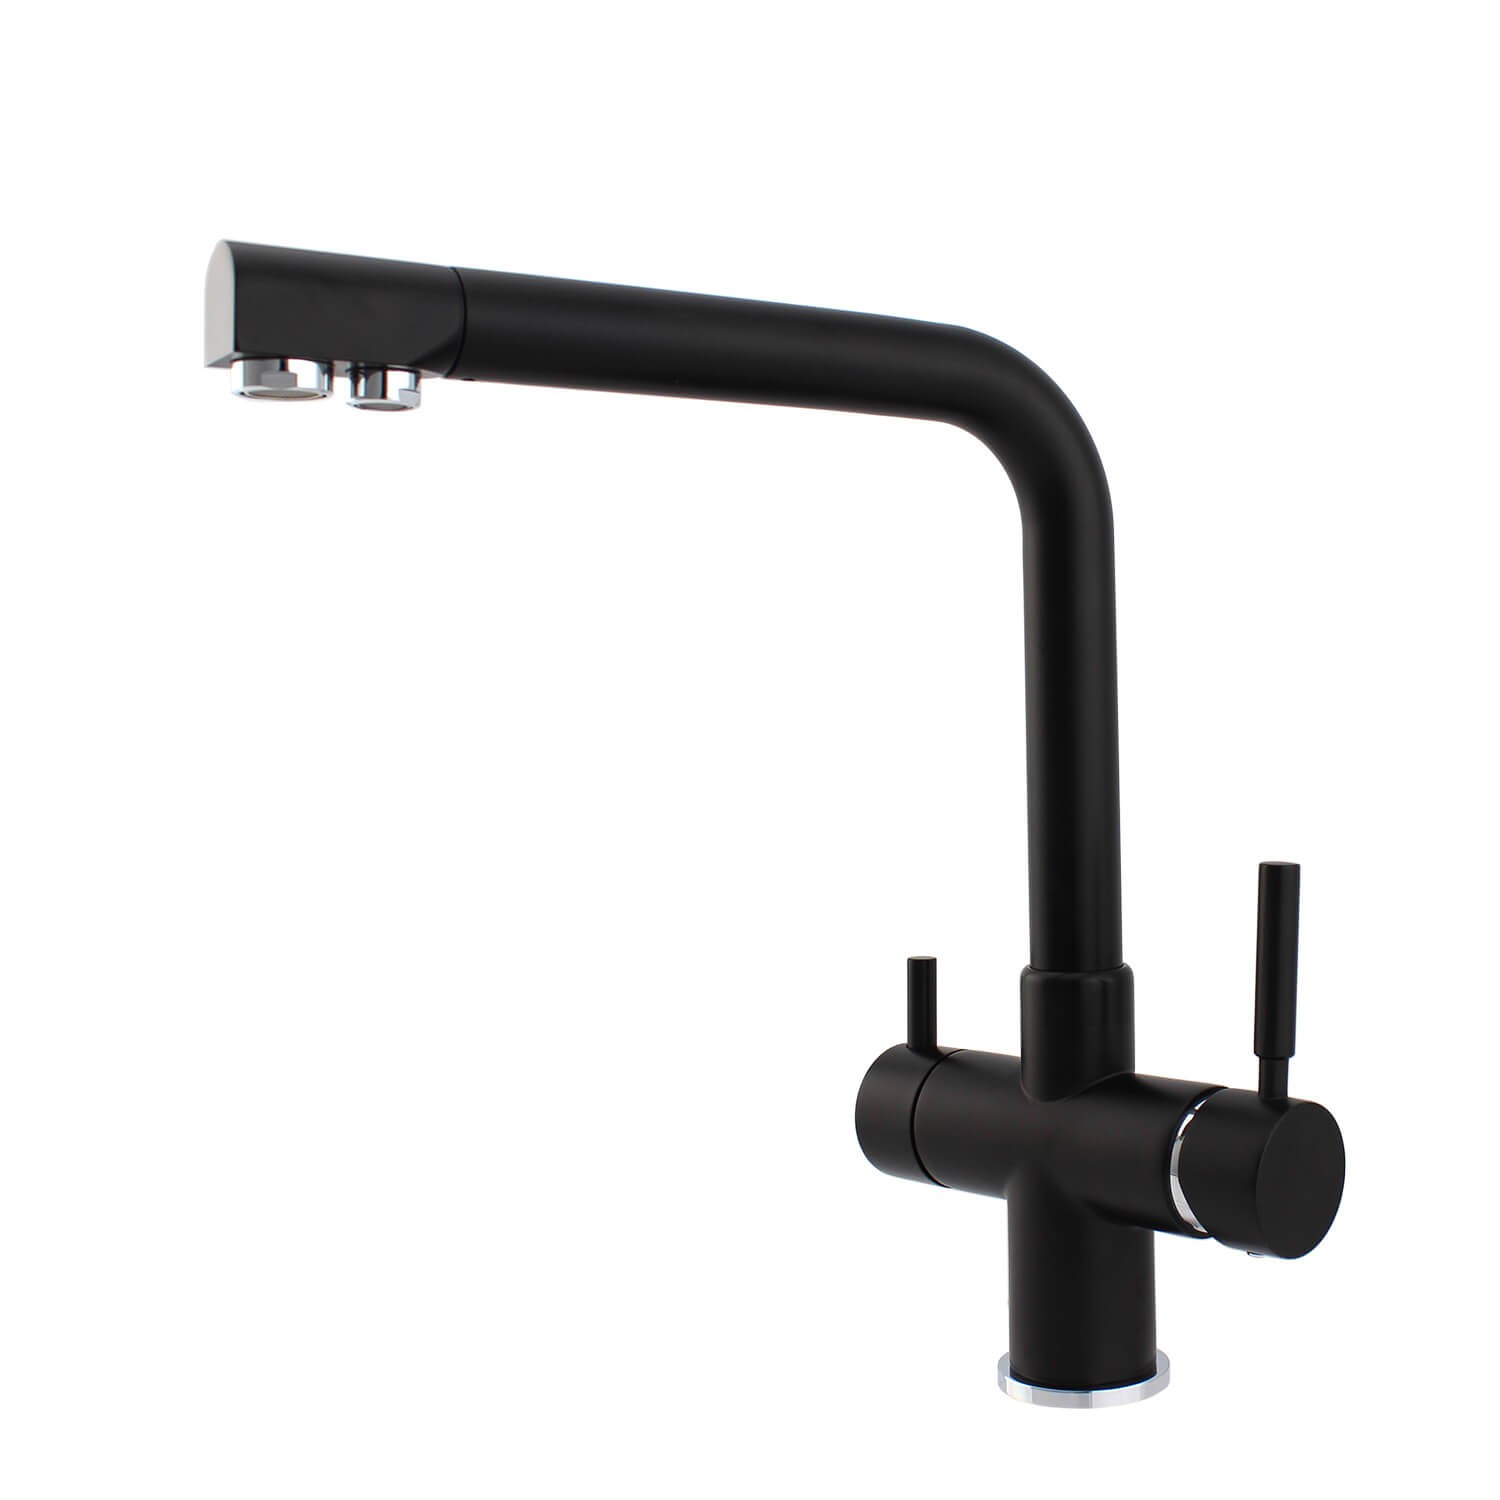 Matt Black 5 Way Faucet Chilled And Soda Filter Water Tap